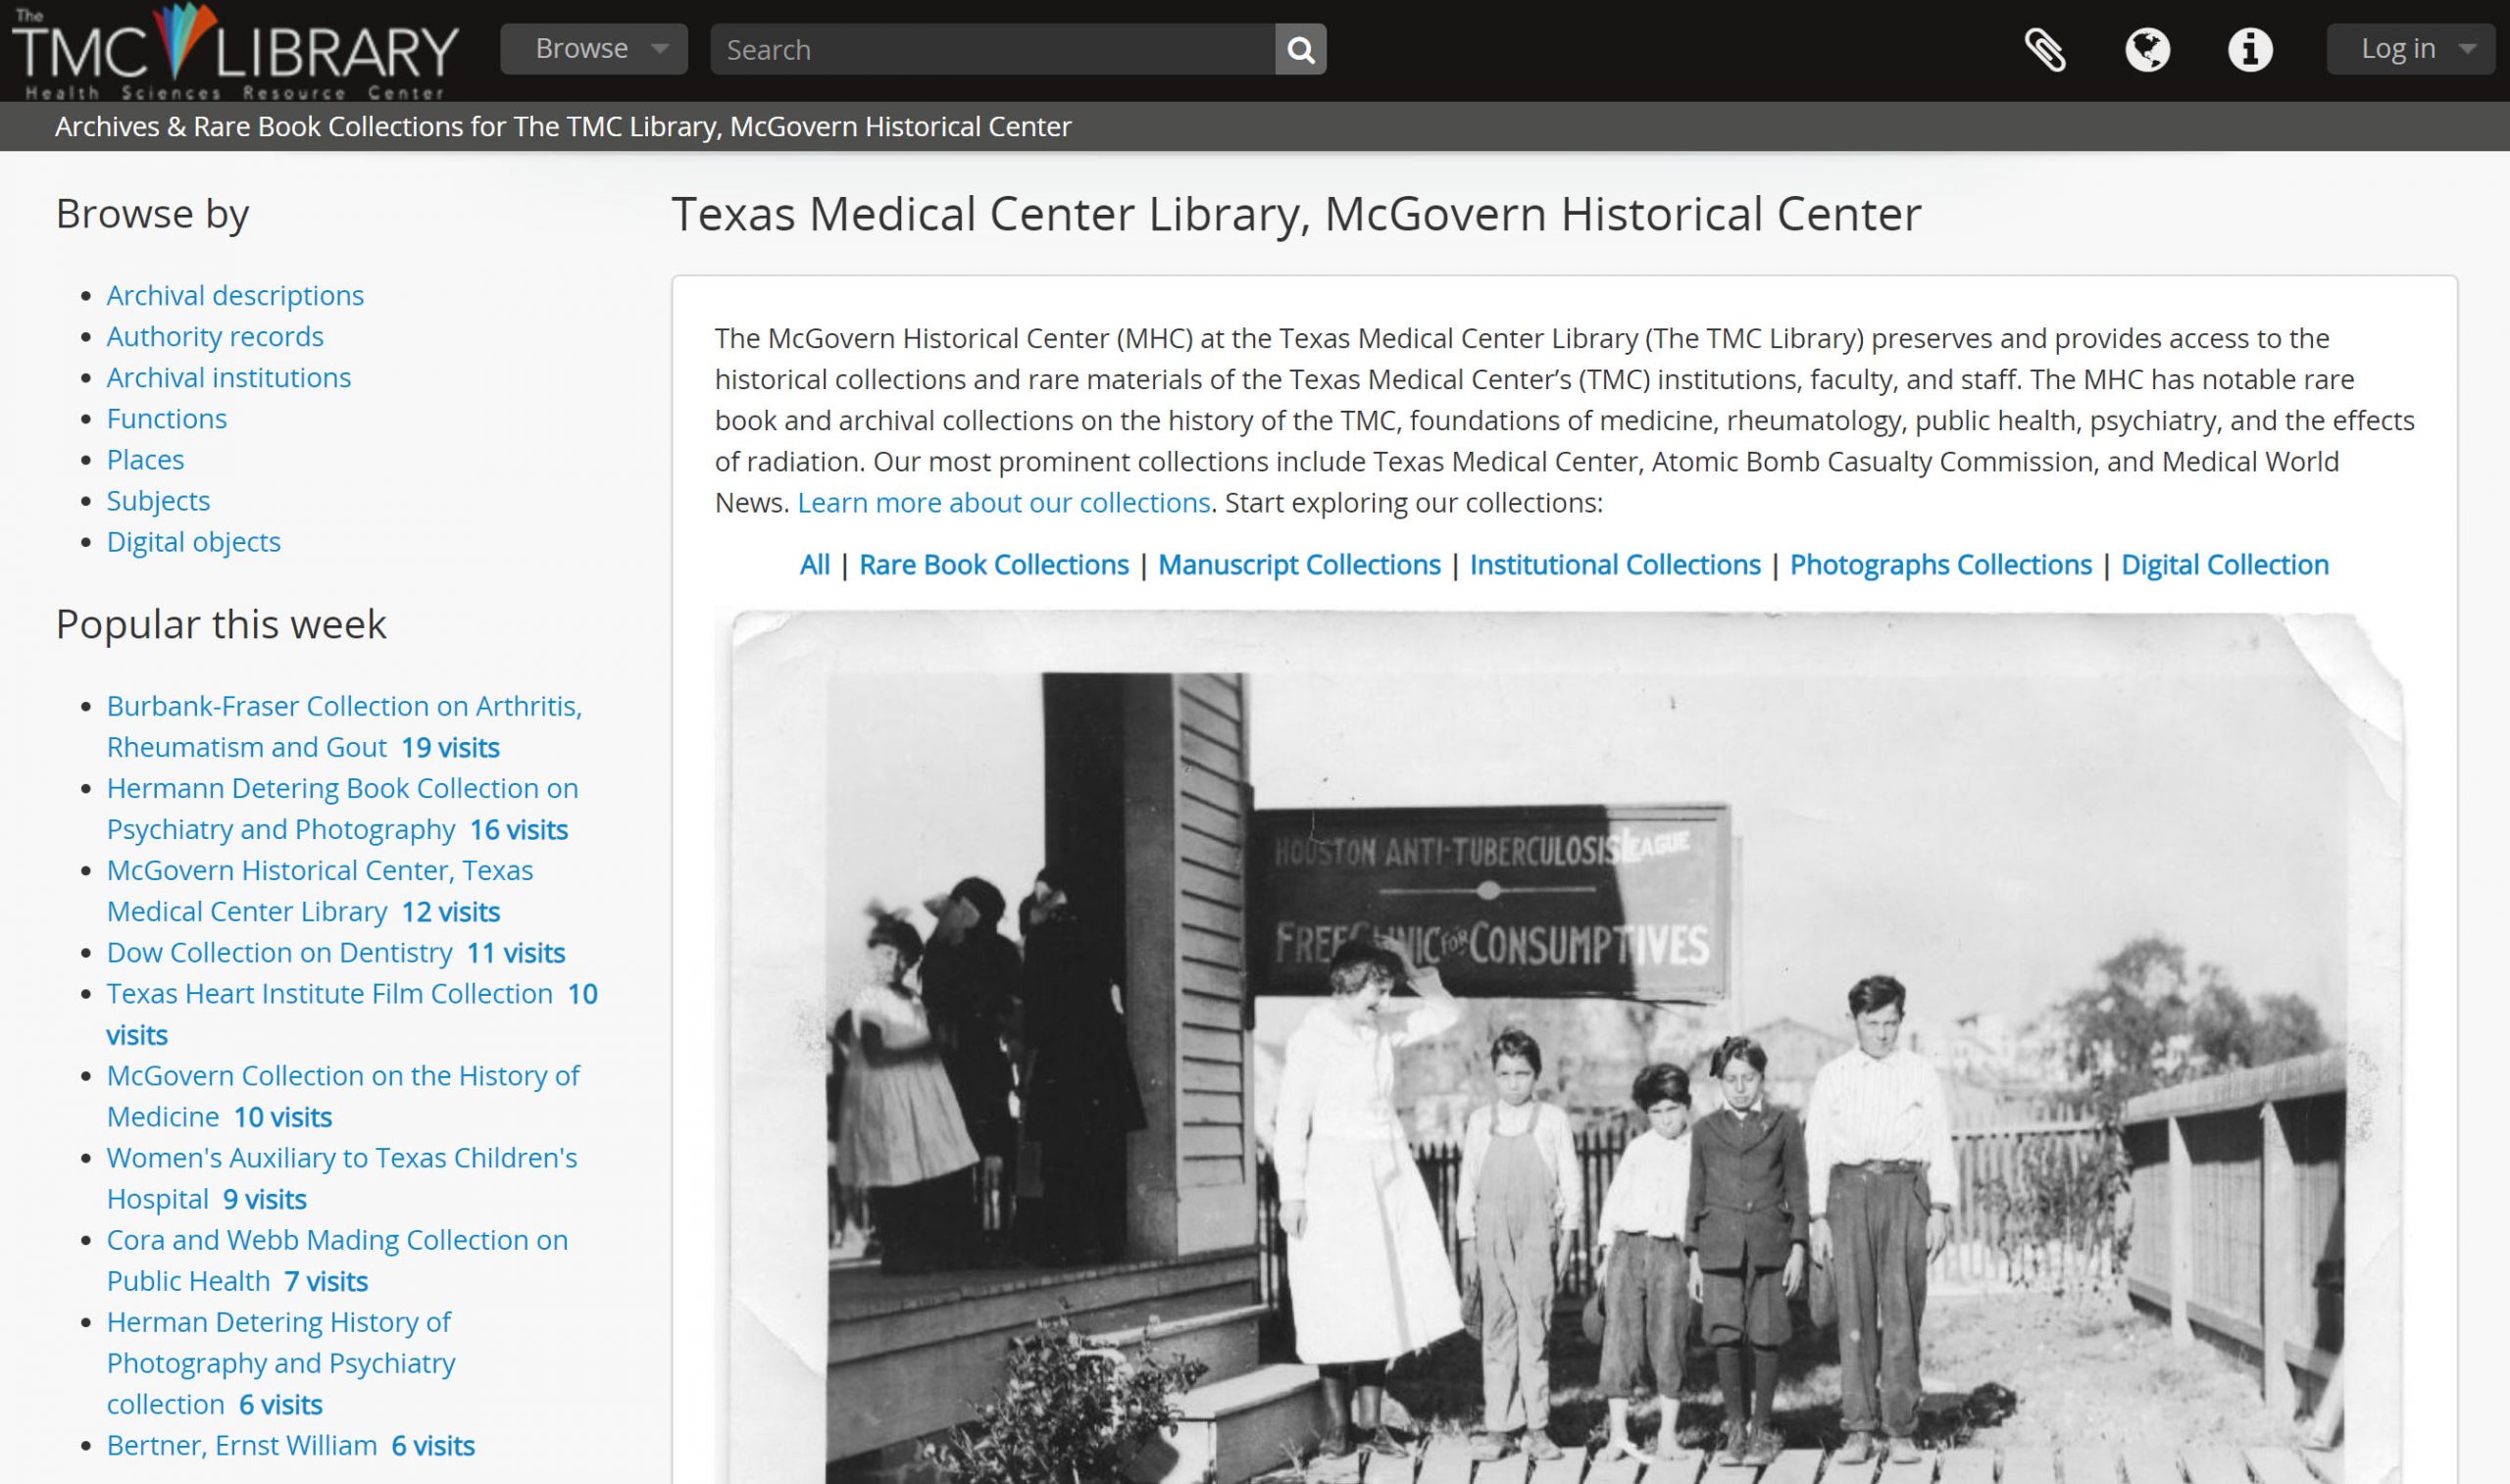 Image of The TMC Library, McGovern Historical Center’s collection search website.